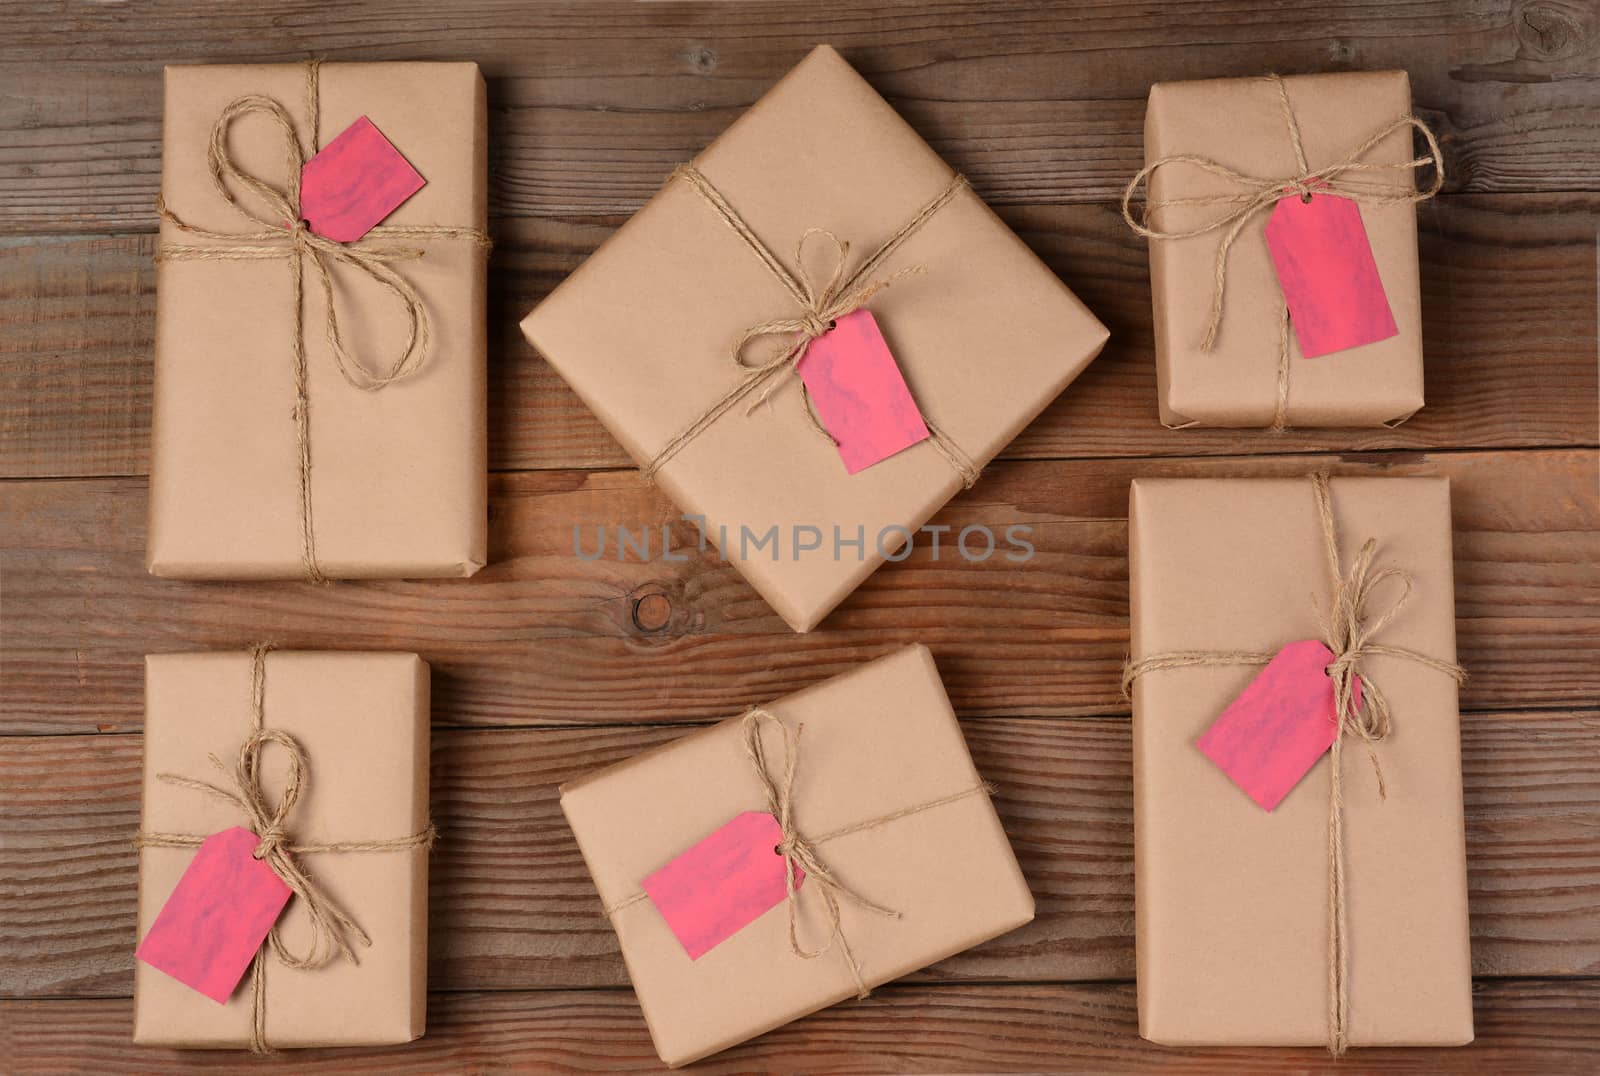 Six holiday packages wrapped in brown kraft paper and tied with twine. The parcels are all different sizes and shapes and resting on a rustic wooden table. There is a blank gift tag attached to each gift. Shot form a high angle.